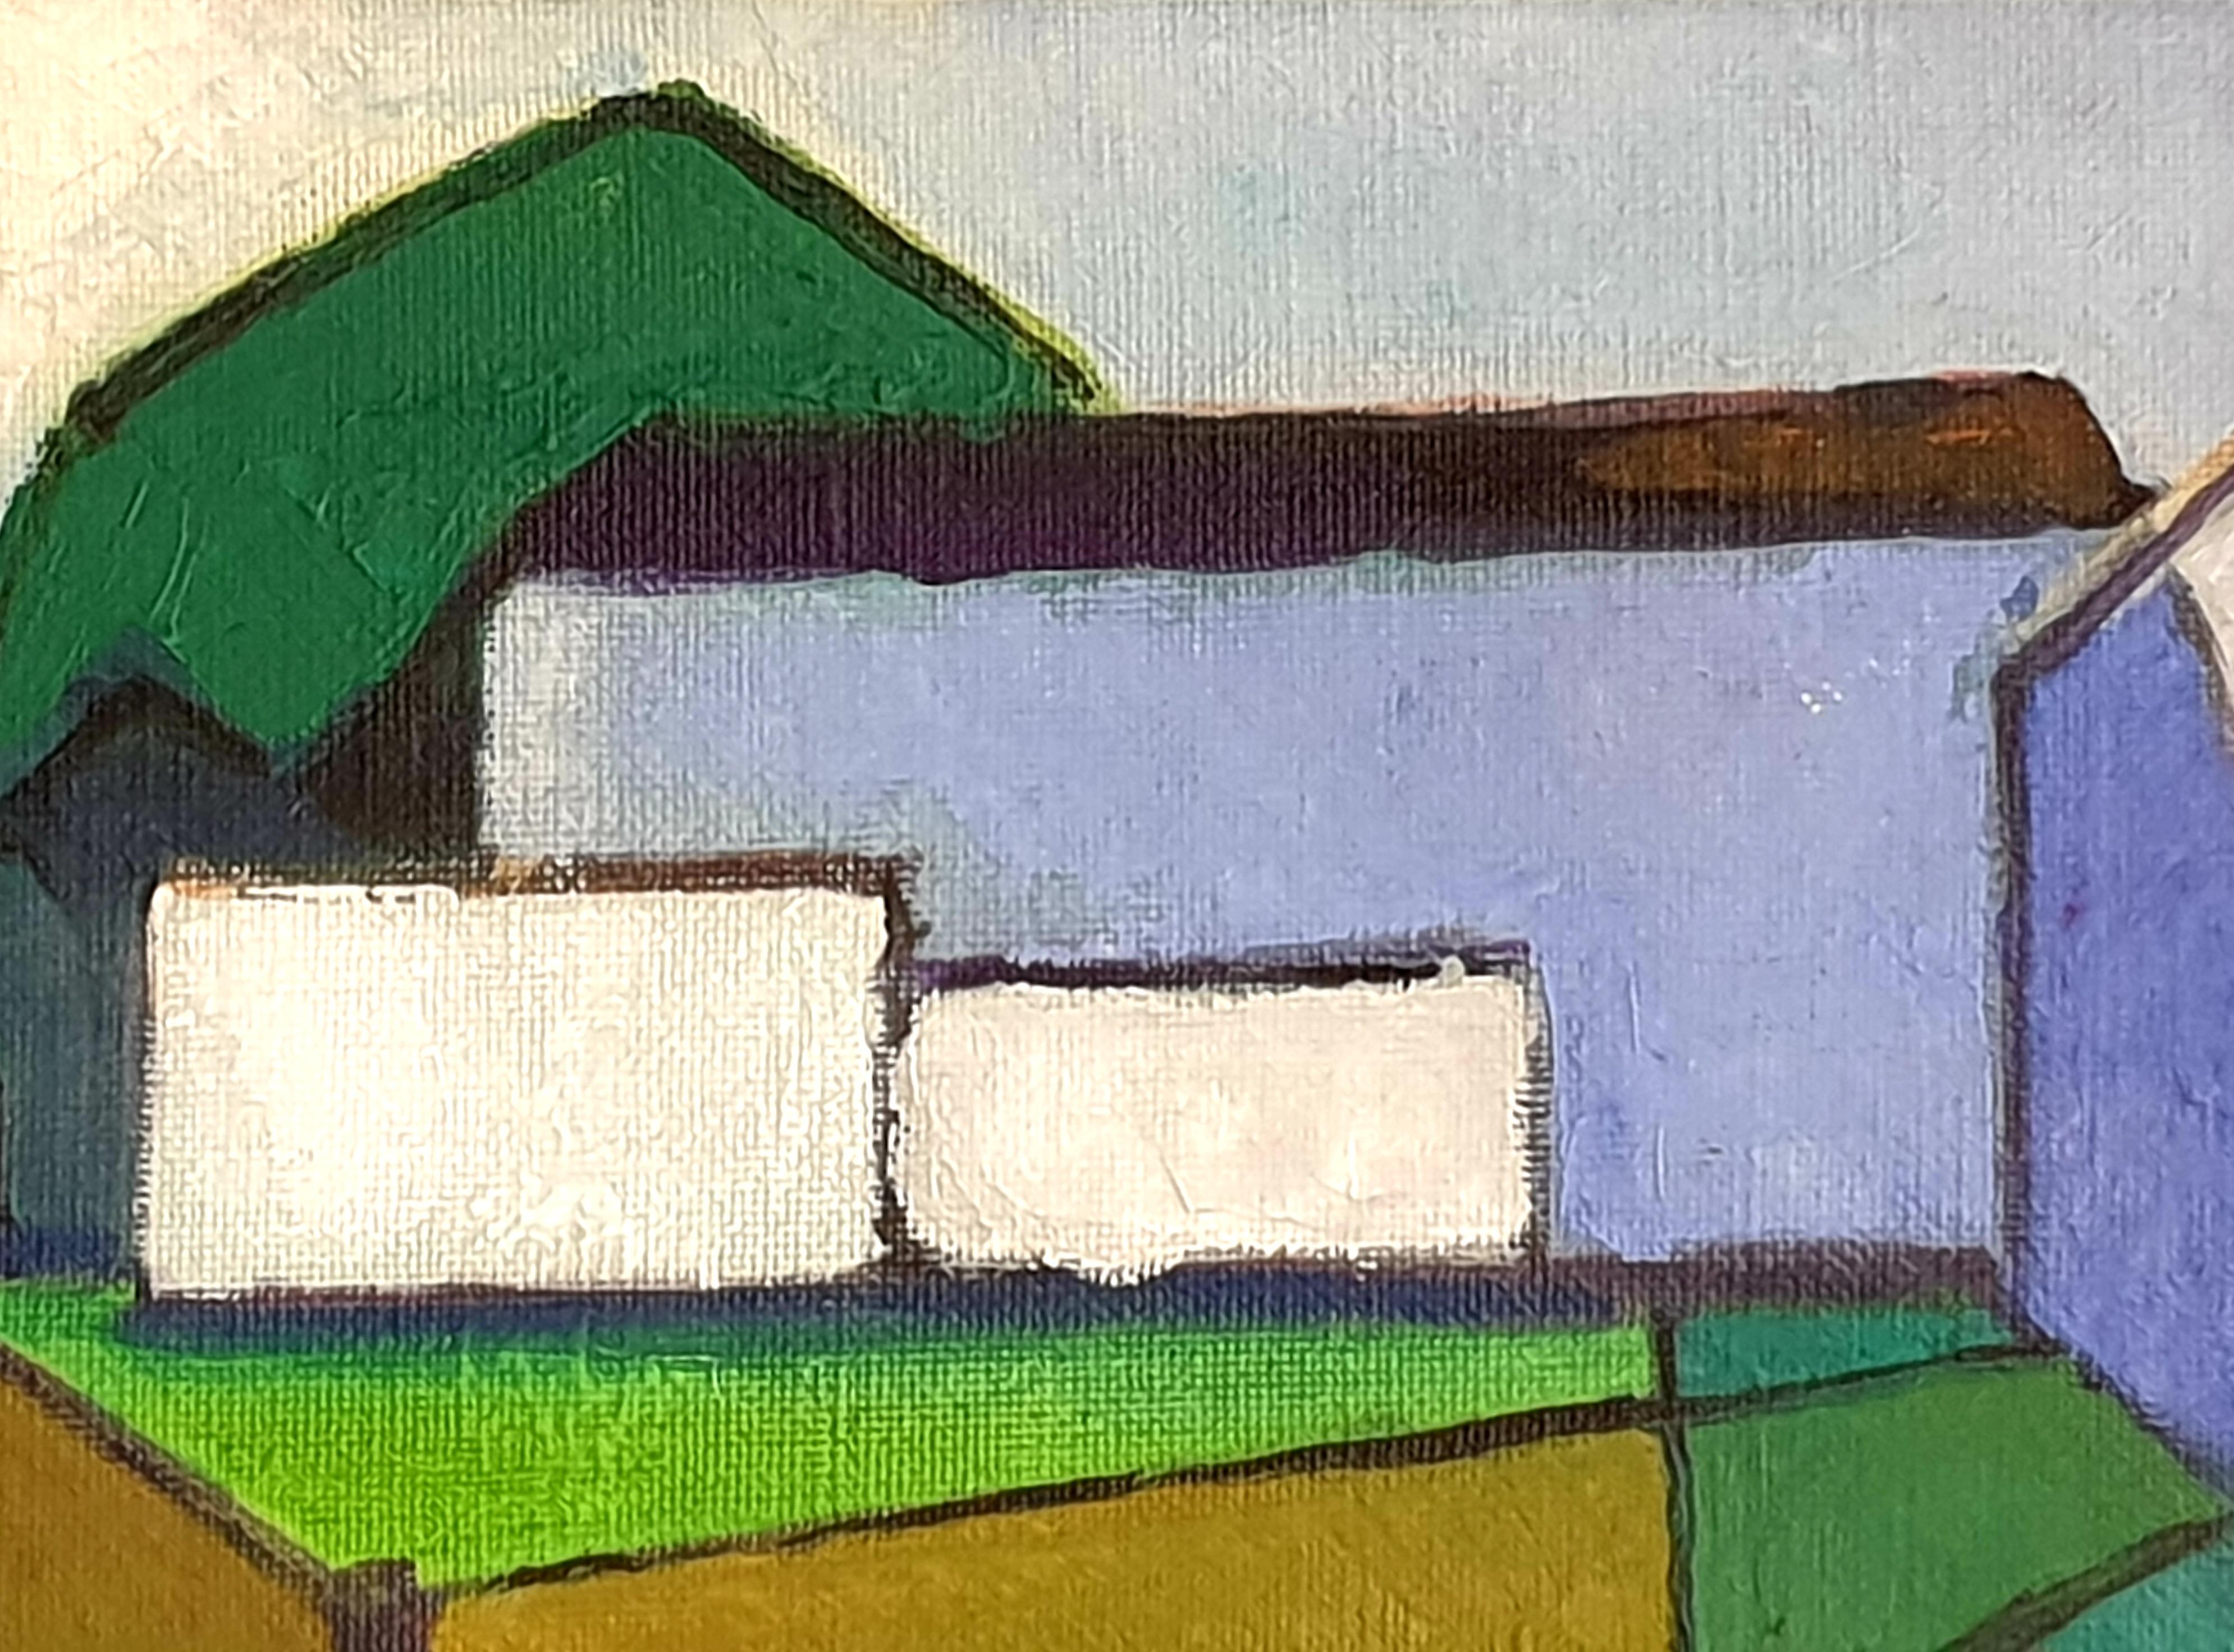 Danish oil on canvas on board painting of a house in a landscape by Poul Møller. The painting is initial signed PM and dated '78 bottom right. Presented in a plain silver patinated wood frame.

Provenance: Acquired directly from the artist atelier